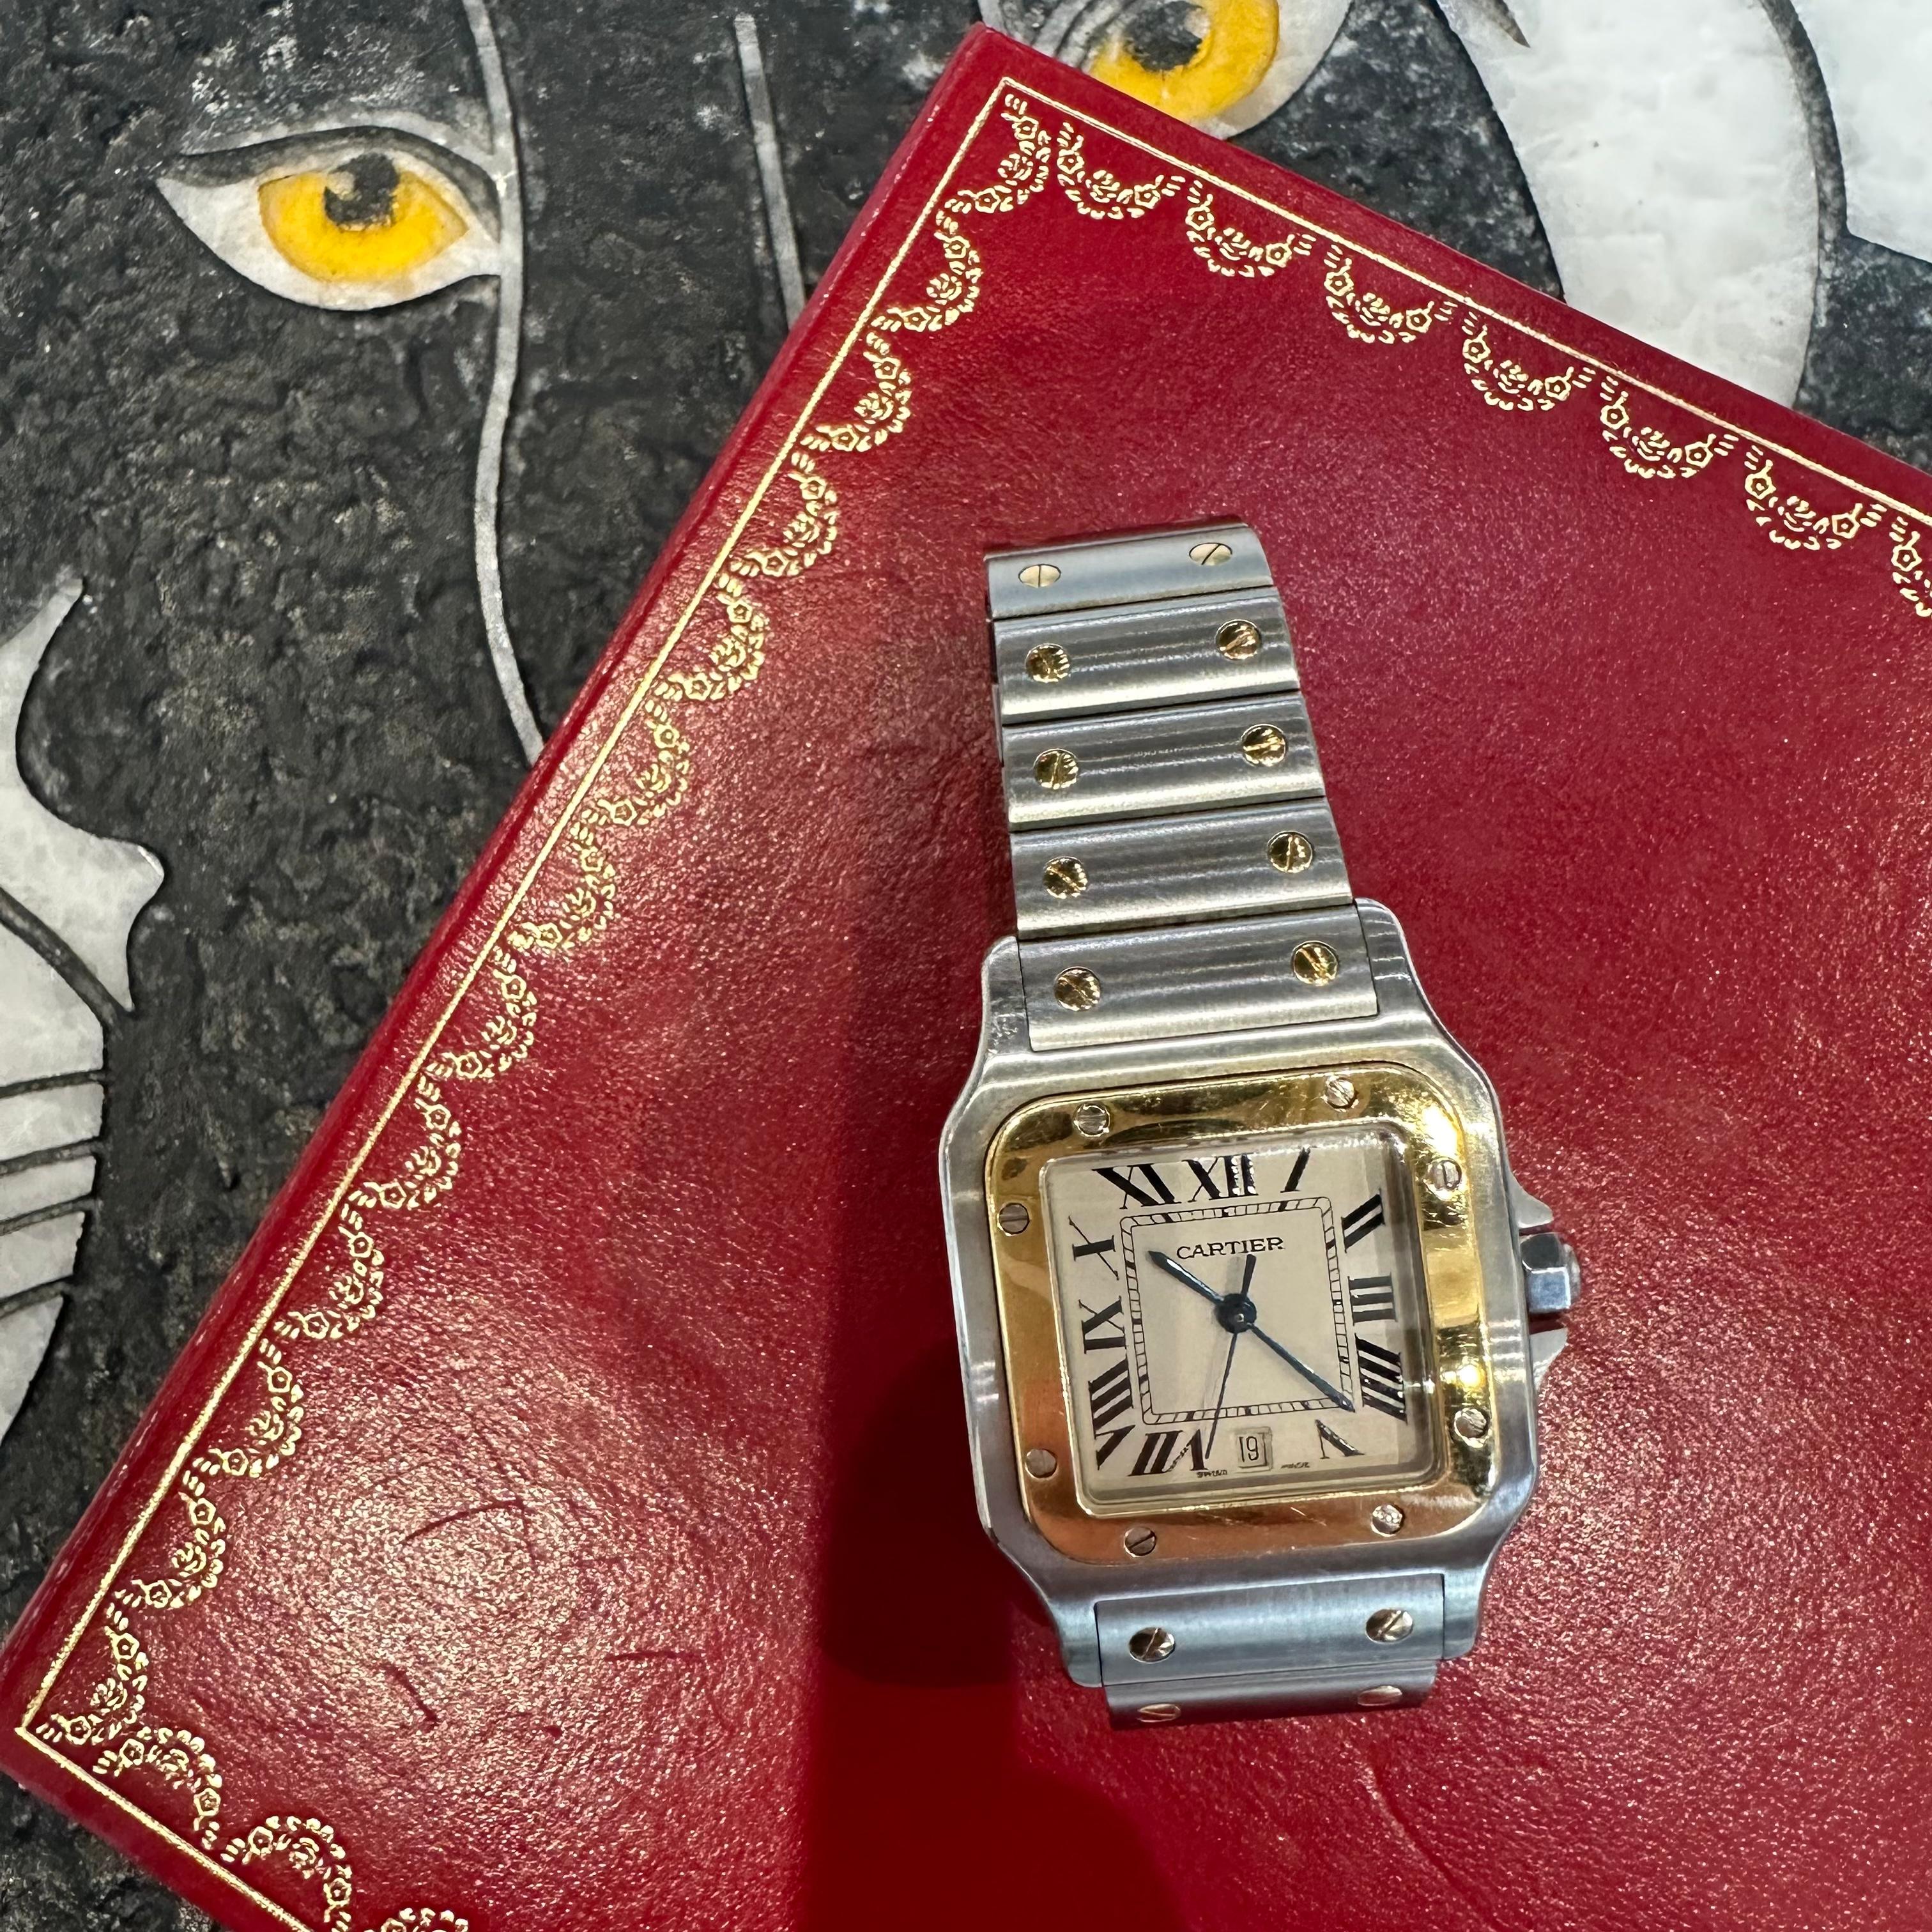 Brand: Cartier

Model: Santos Galbee

Ref: W20011C4/1566

Movement: Quartz

Bracelet Fit : 6.75 inches

Case Size: 29 mm x 29mm 

Material: Stainless Steel ​and 18k Yellow Gold

Year: 2006 

Crown: Synthetic Blue Spinel

Dial:  White 

Includes: 24